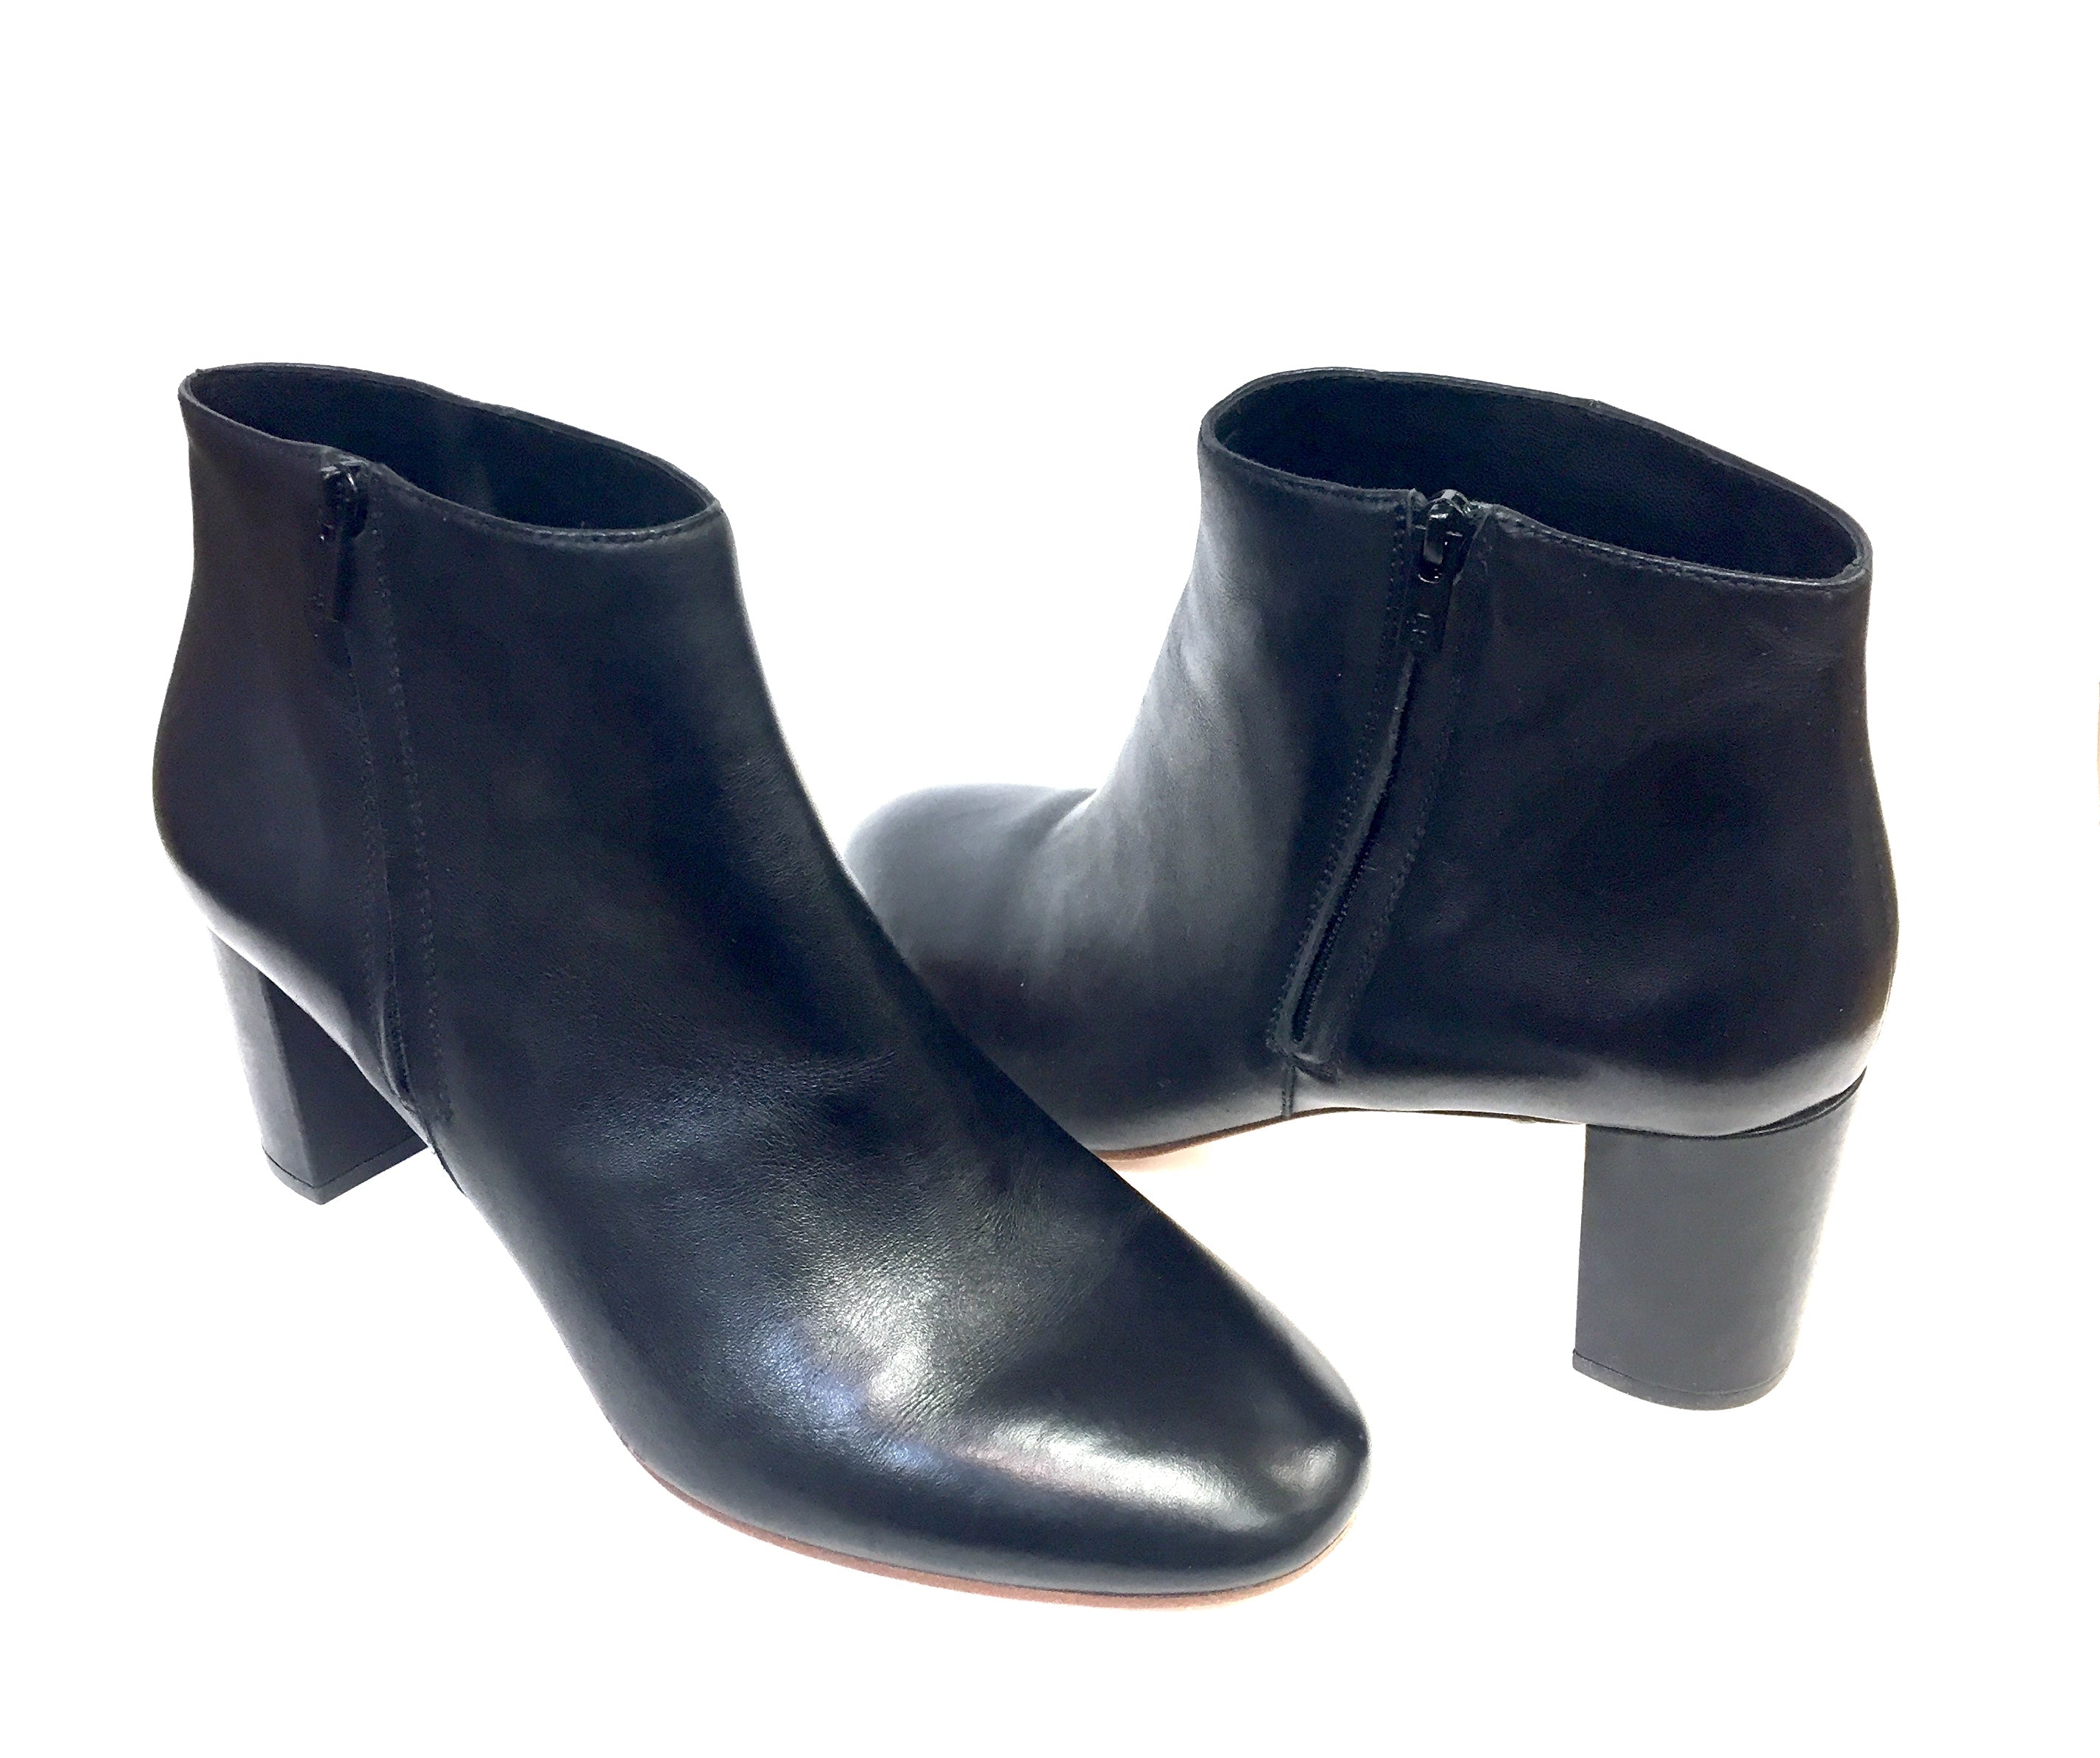 size 10 ankle boots